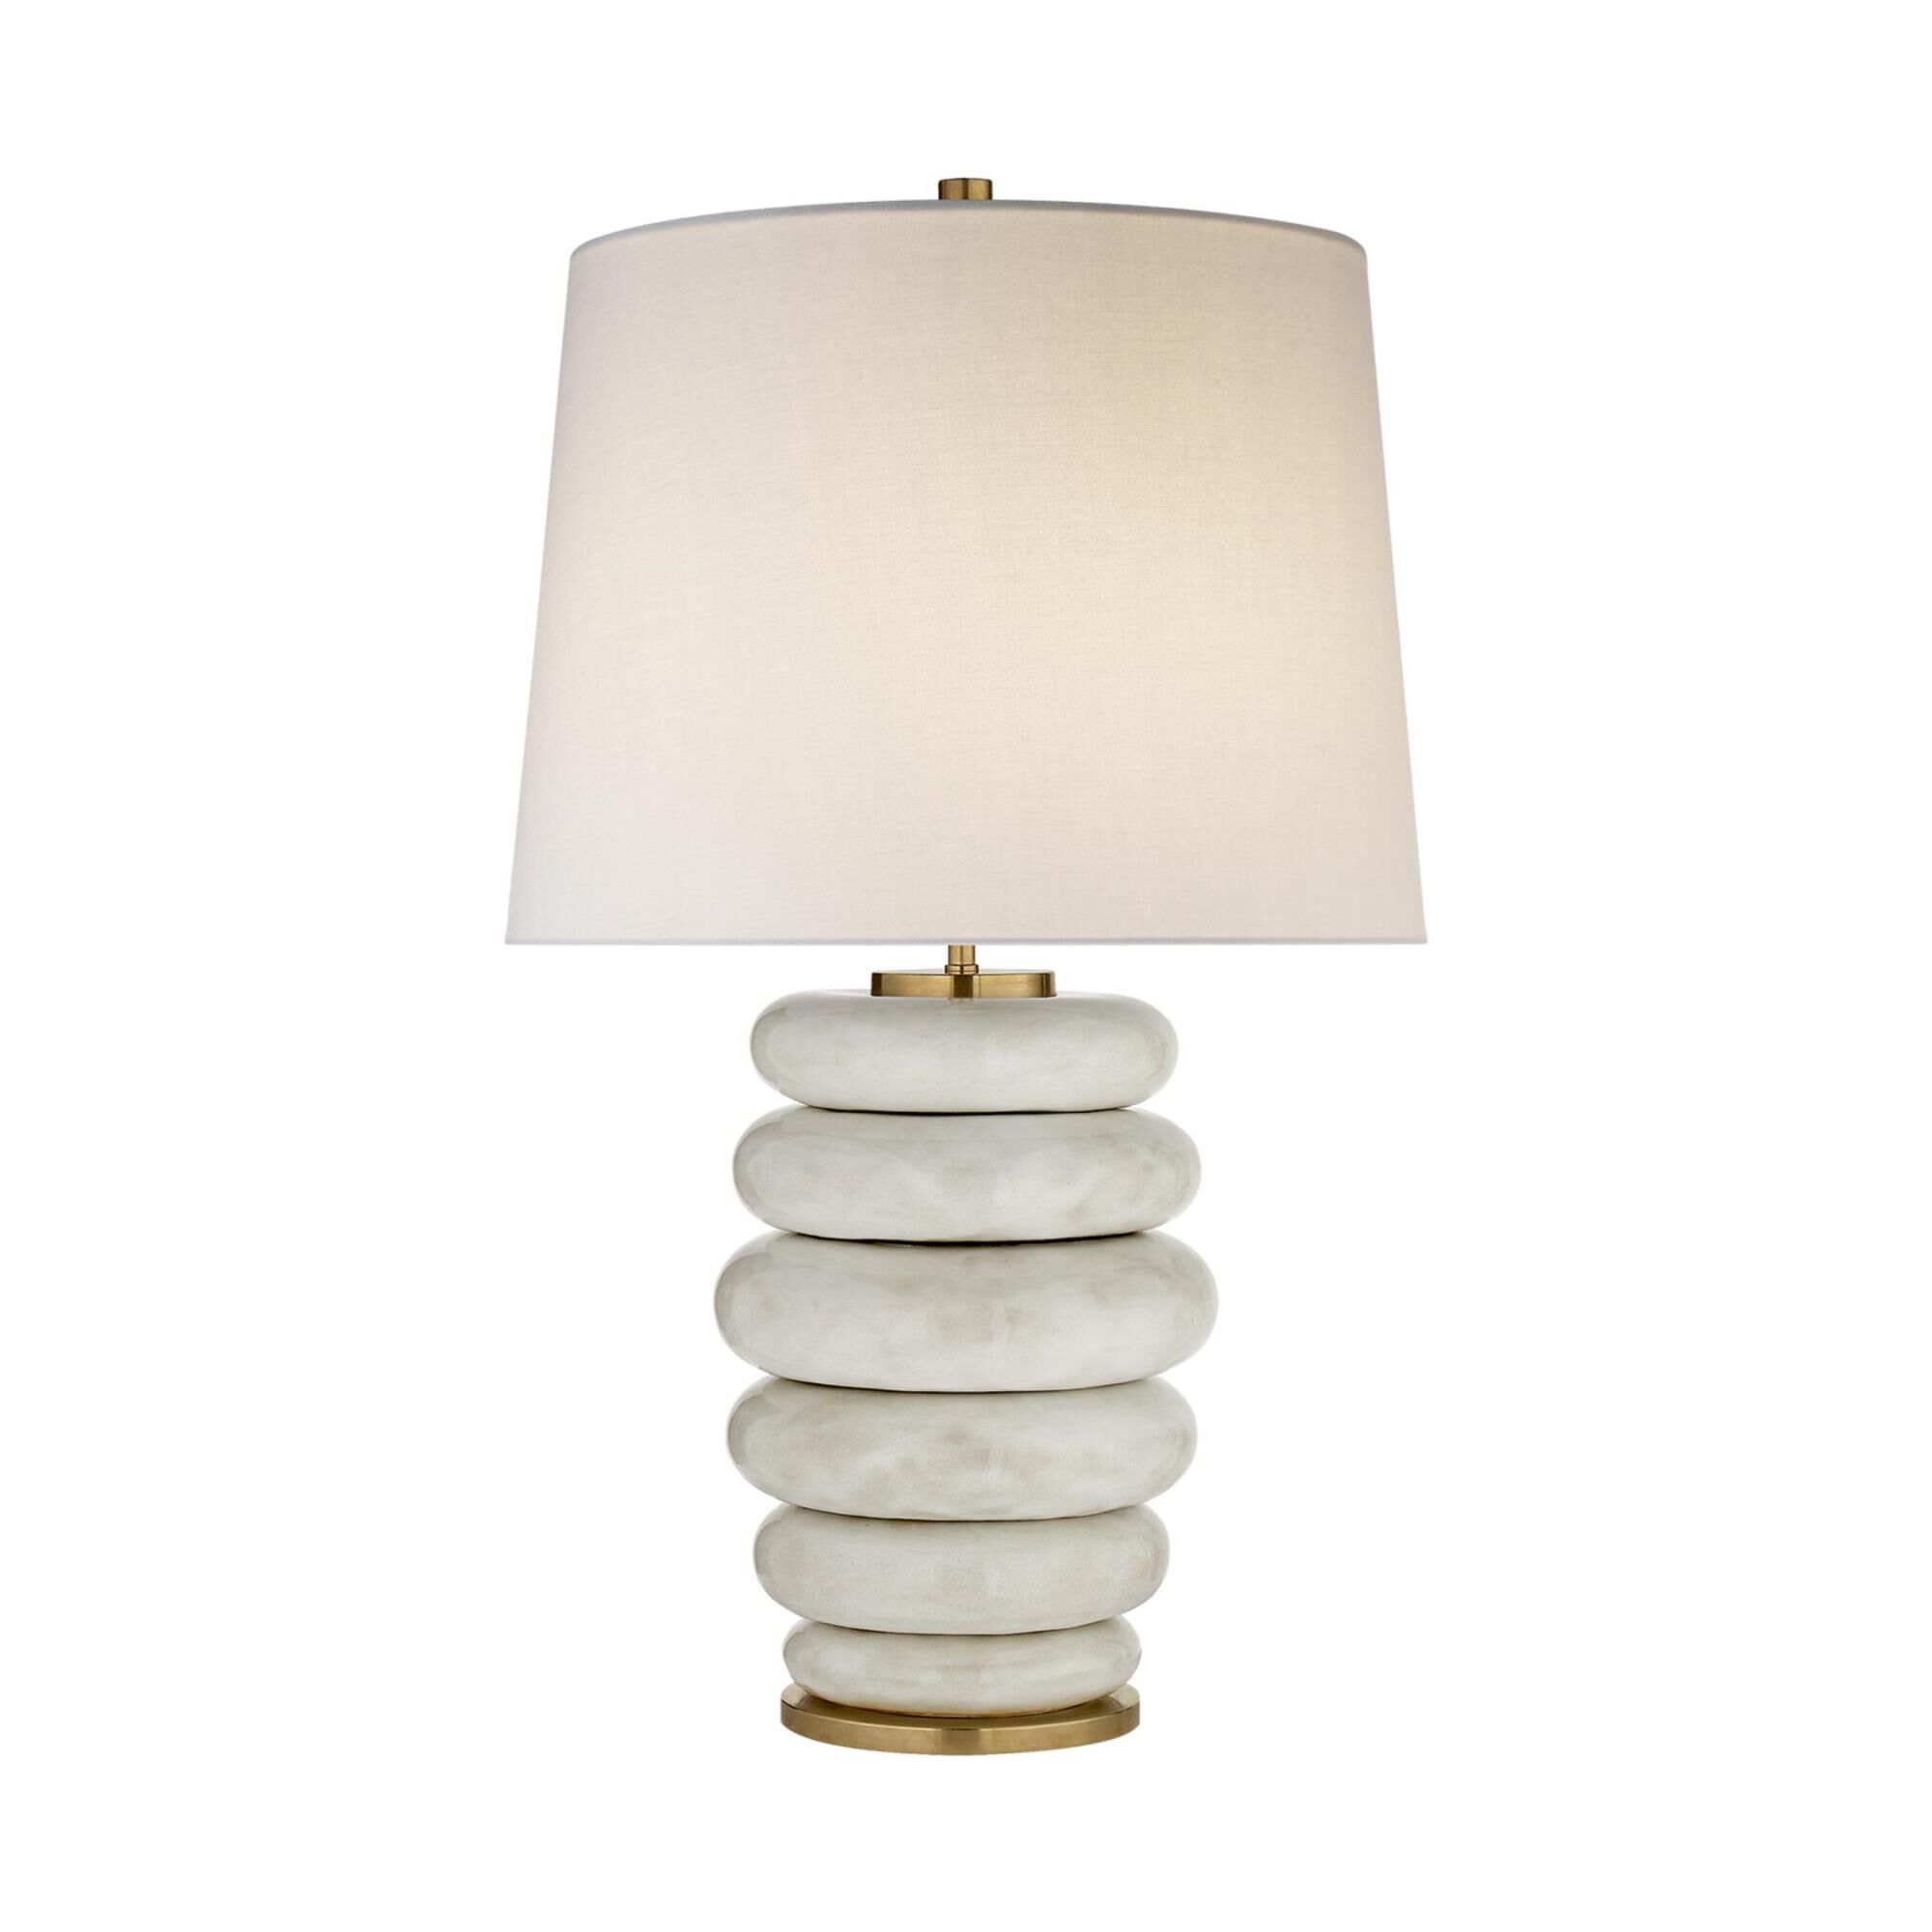 Kelly Wearstler Phoebe 28 Inch Table Lamp by Visual Comfort and Co. | Capitol Lighting 1800lighting.com